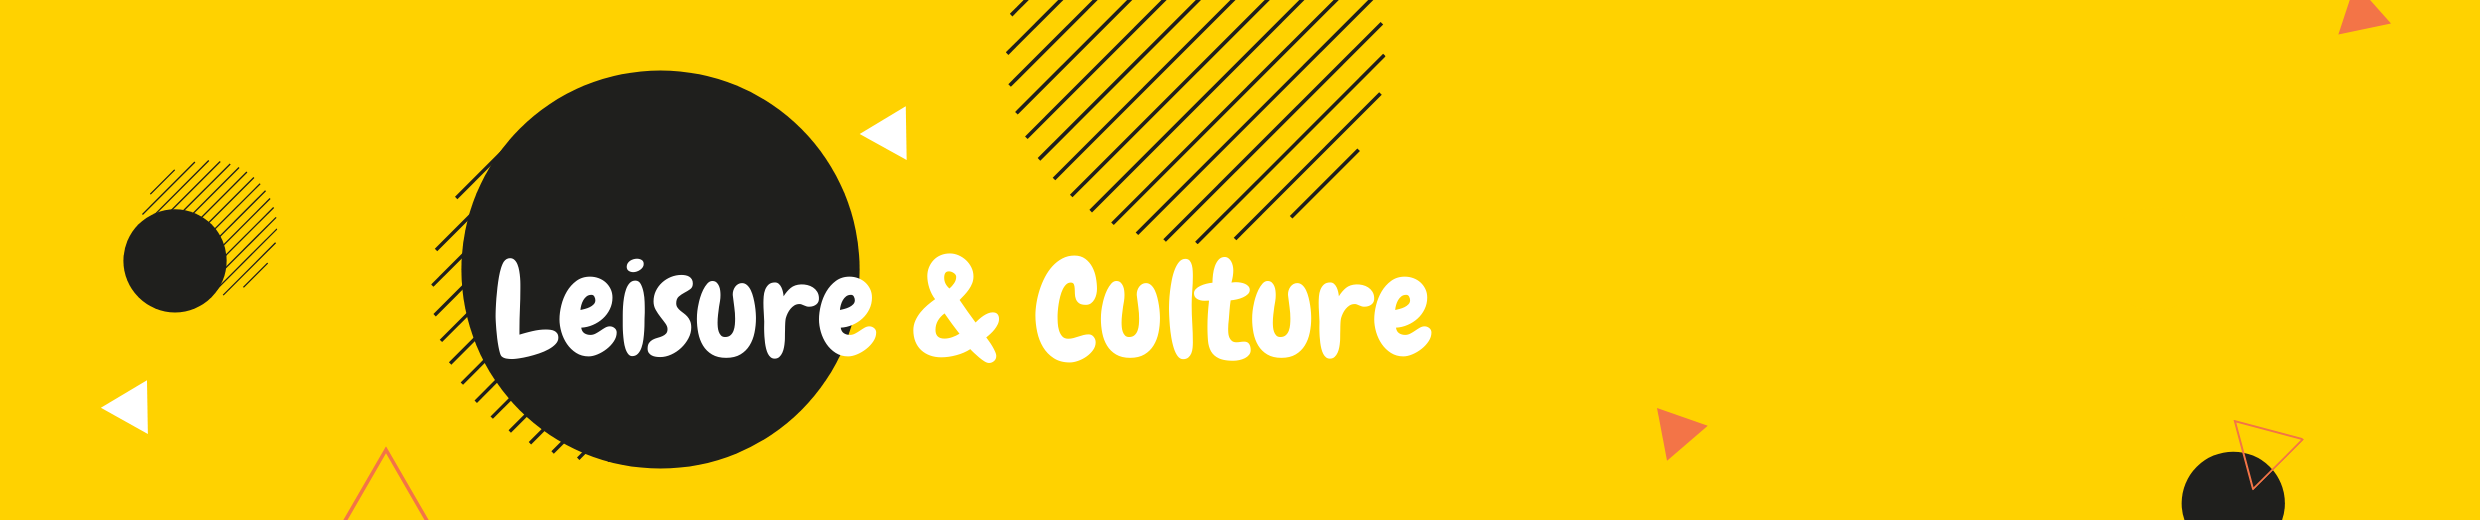 Leisure and Culture banner